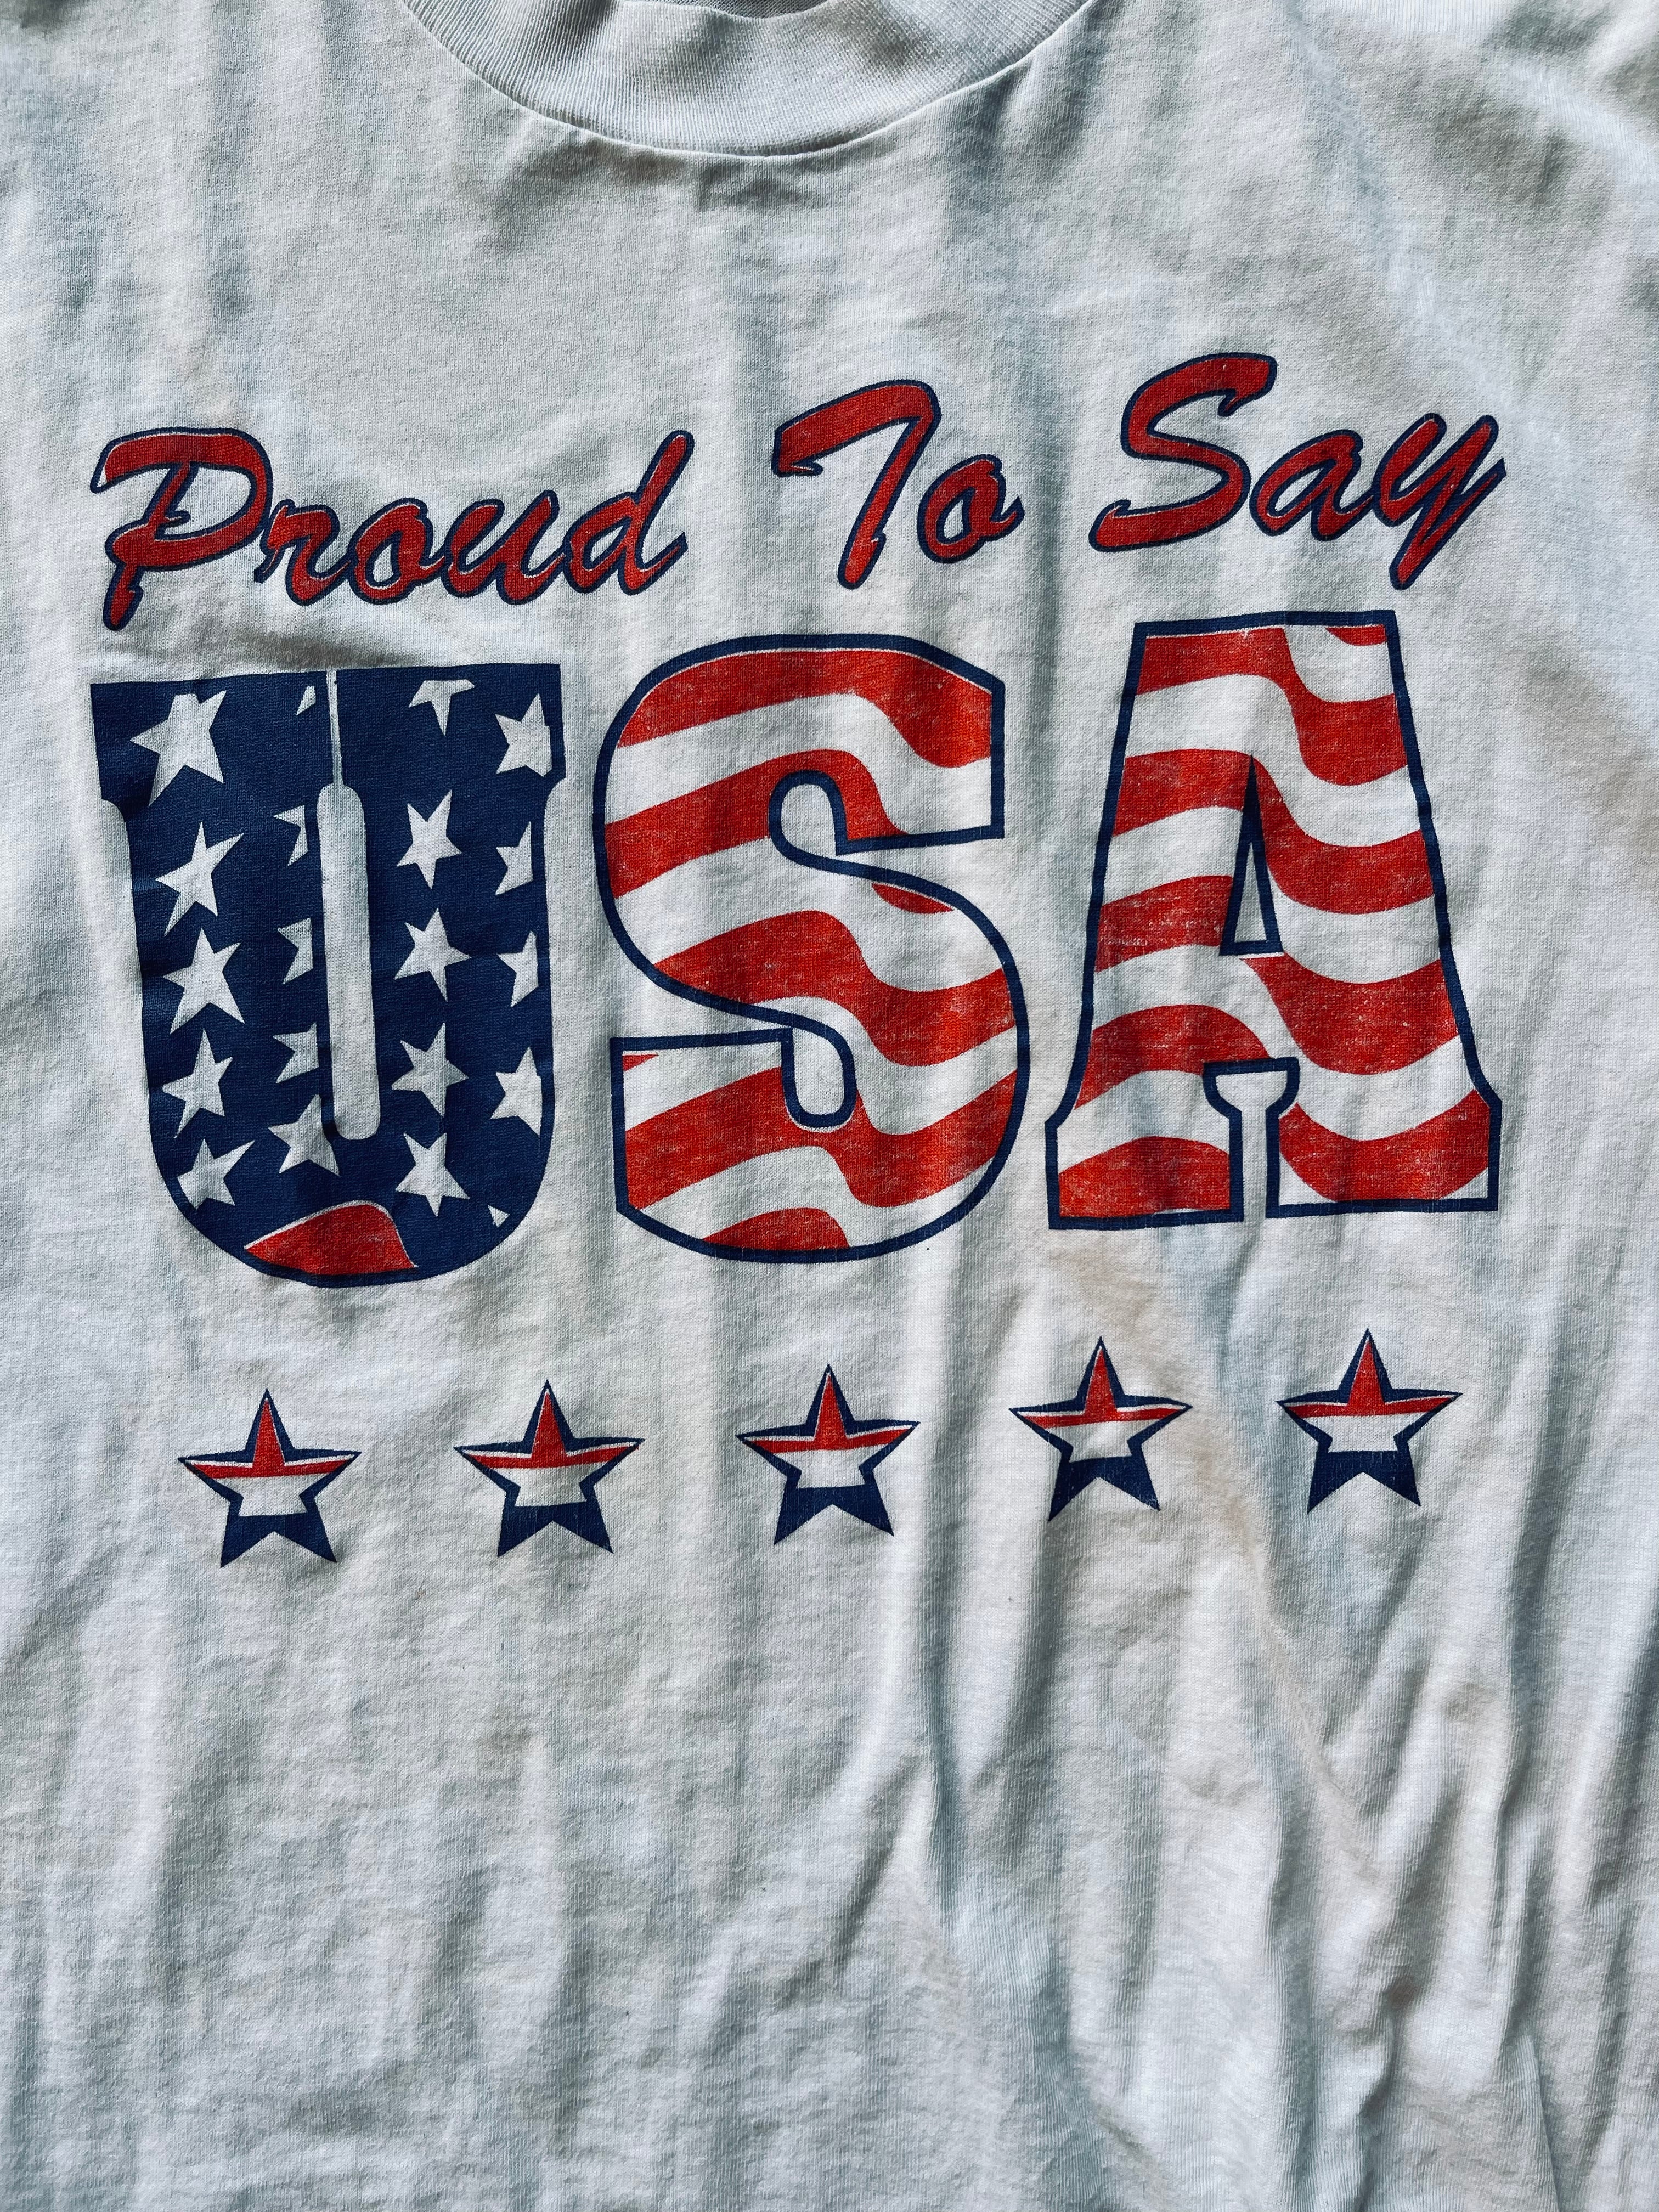 Vintage Screen Stars “Proud To Say USA” | Large